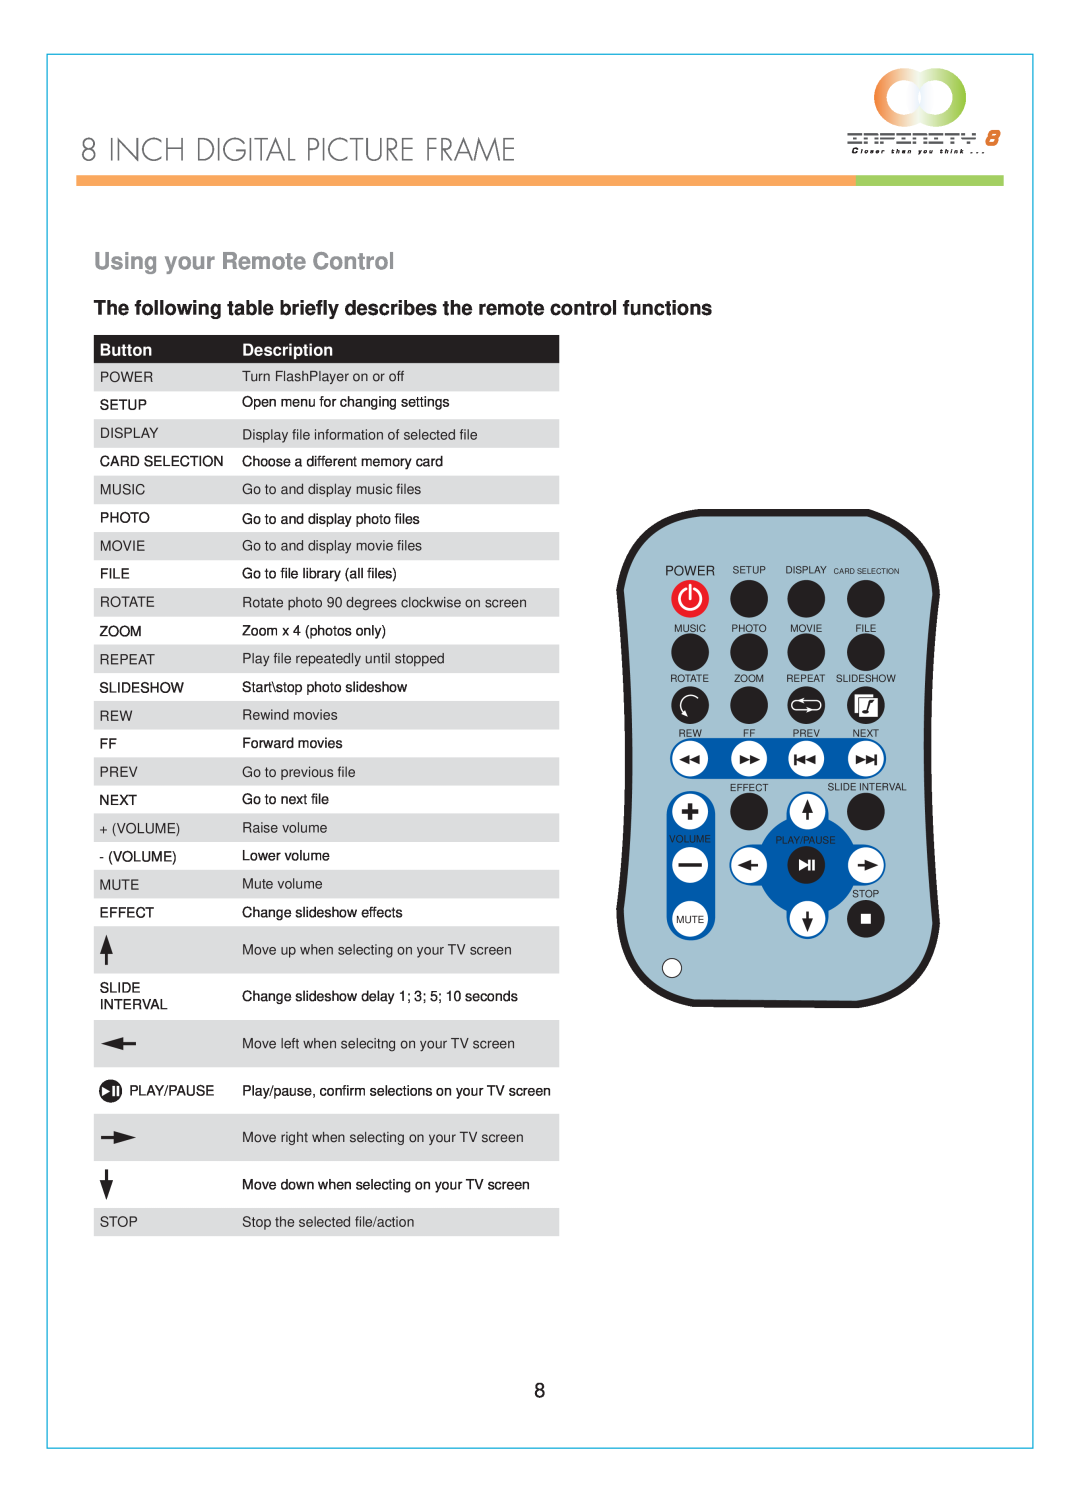 Infinity DPF-8000 user manual Using your Remote Control, Inch Digital Picture Frame, Button, Description 